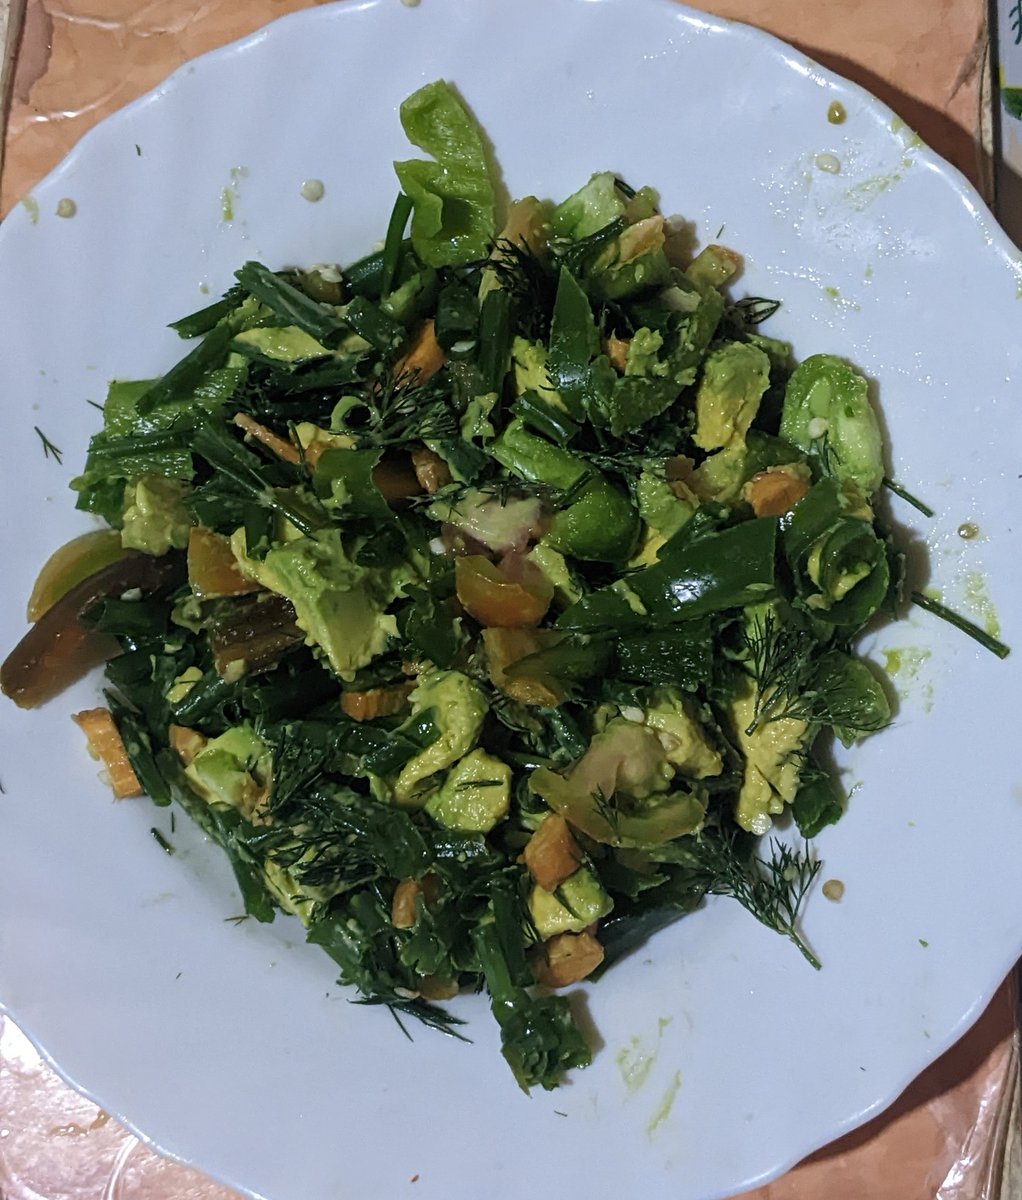 Is there anything like too much salad?

As we observed the #WorldFoodSafetyDay it dawned on me I am among the few with access to pesticide-free vegetables 

I now want to eat all greens from our #kitchengarden grown with compost, rain water, natural pest management
#Agroecology